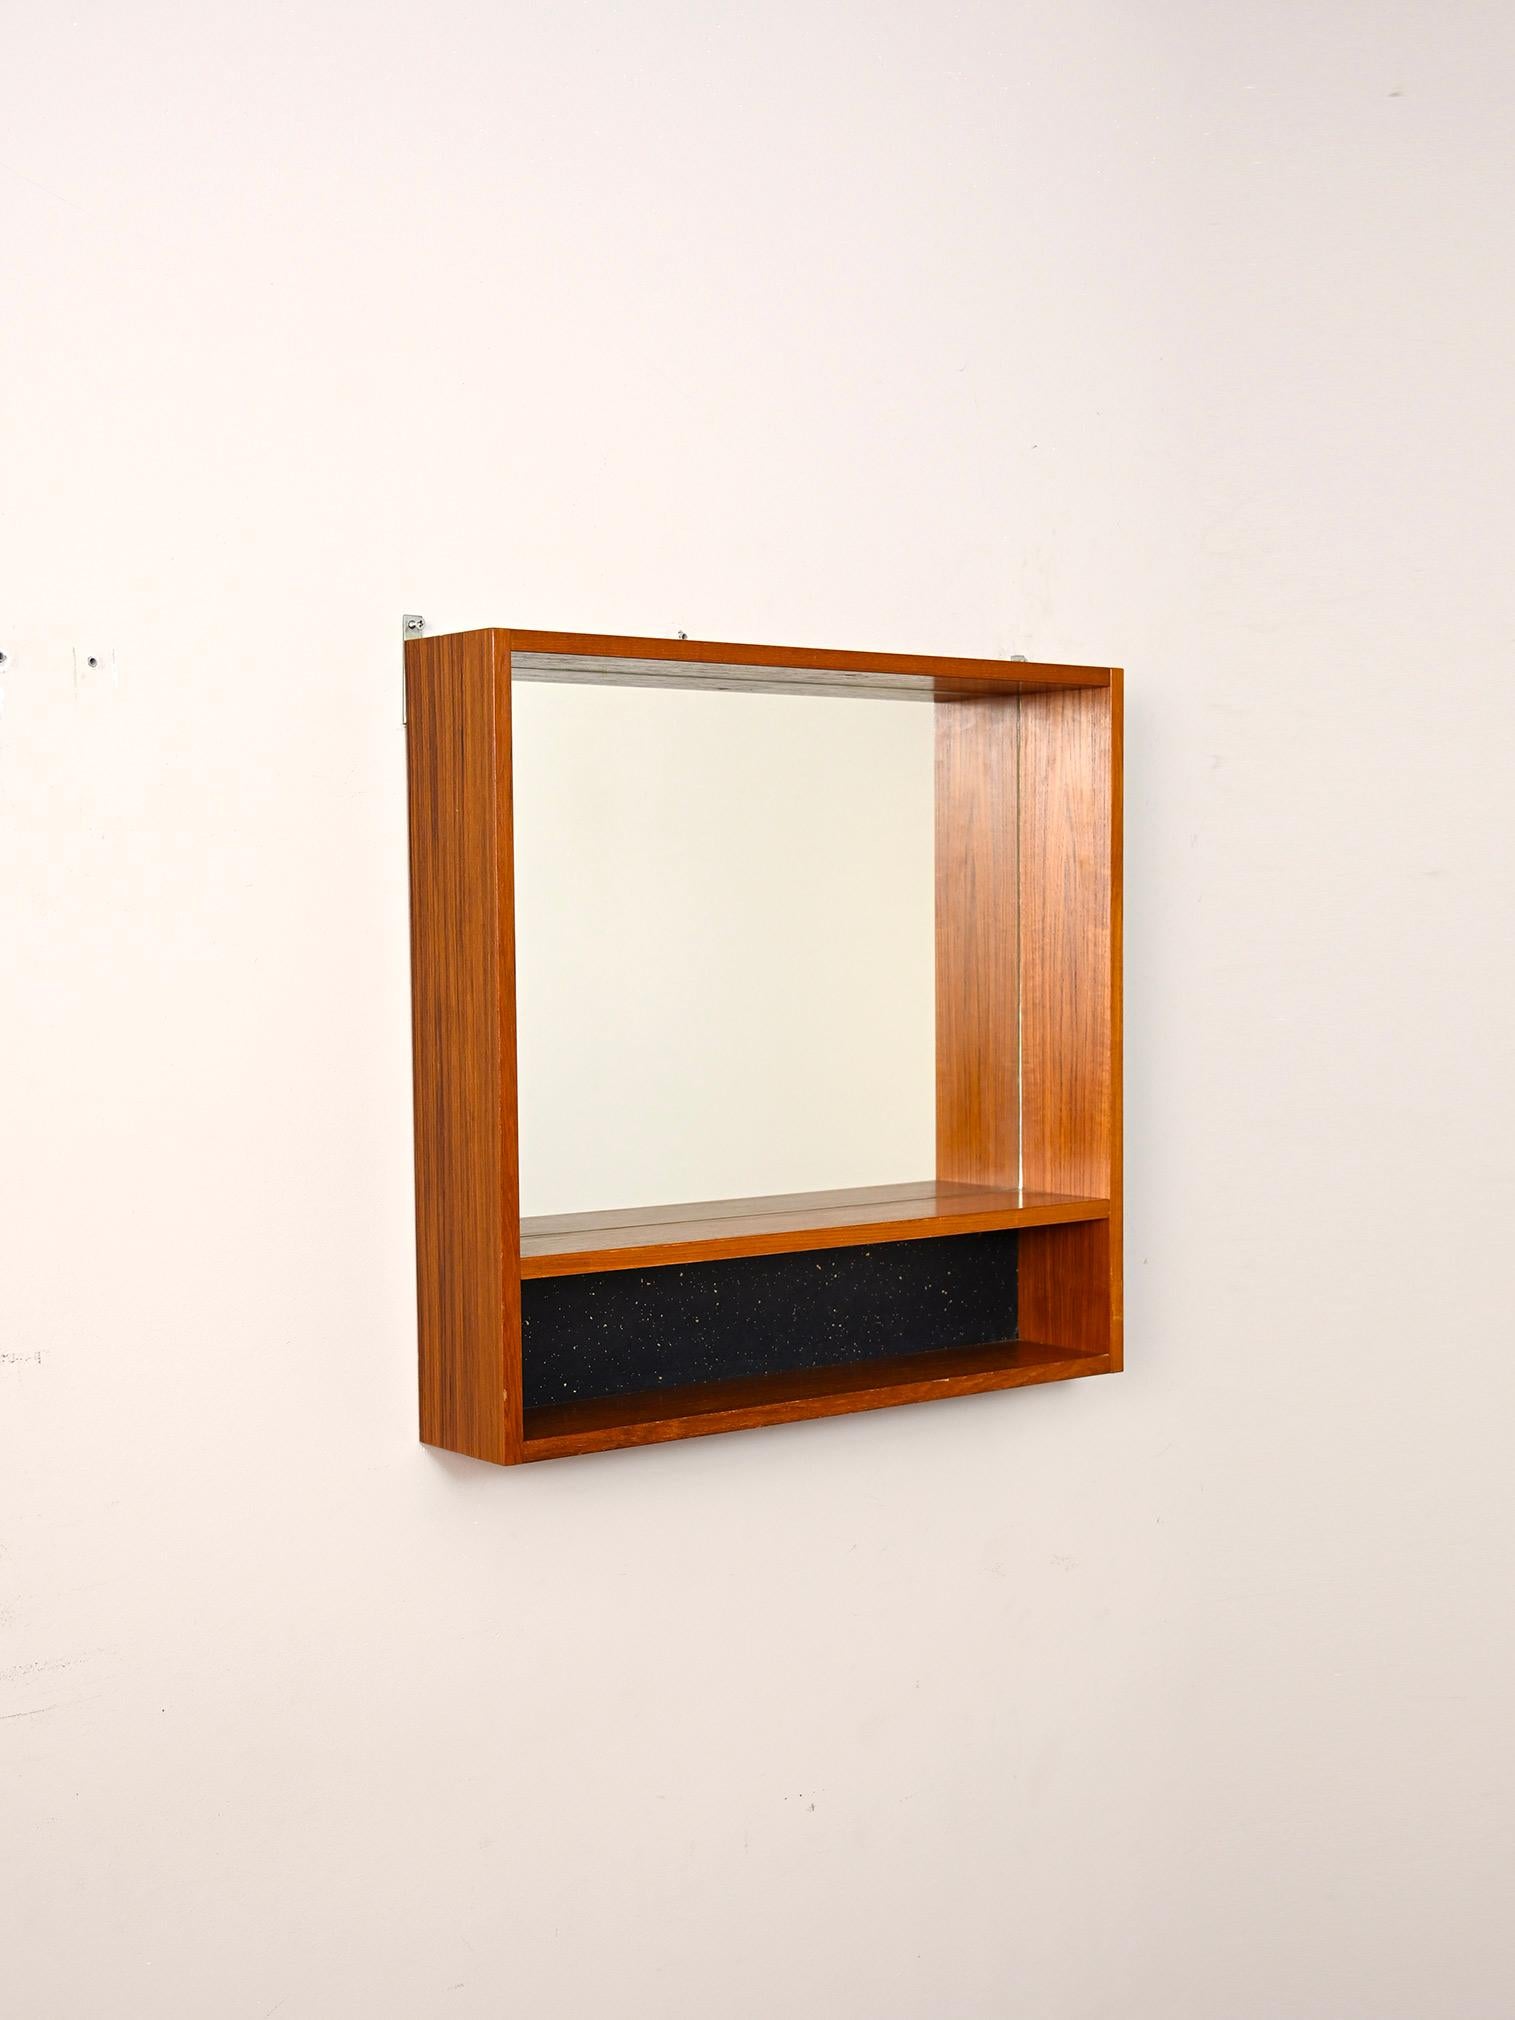 Original 1960s teak framed mirror.

Peculiar piece of vintage Scandinavian modernism with double shelf built into the frame.
Ideal as a mirror to hang above the sink.

Good condition. A conservative restoration has been done. It may show some signs